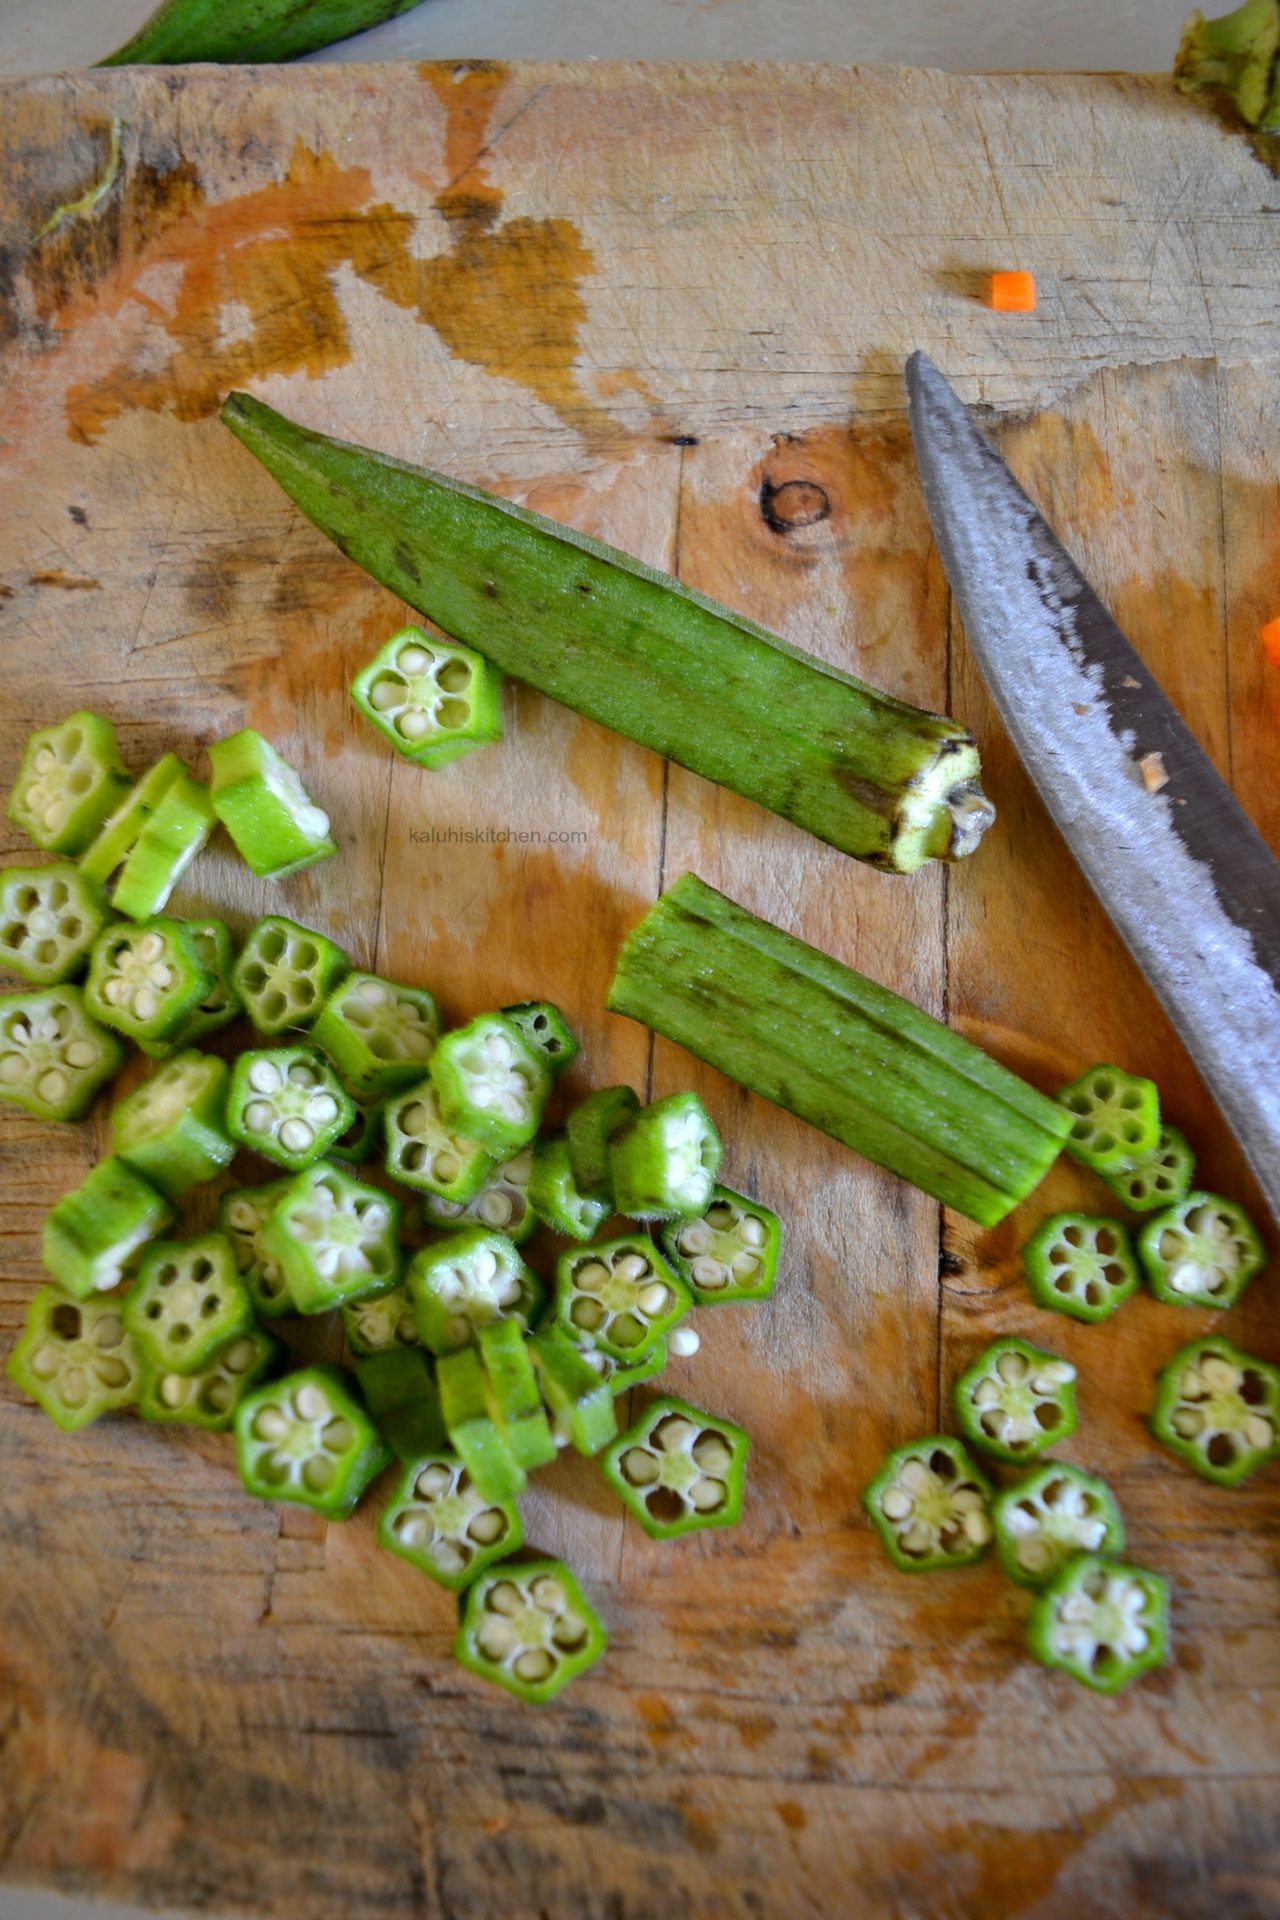 slice your okra really thinly so that it cooks faster and does not overwhelm while eating_kaluhiskitchen.com